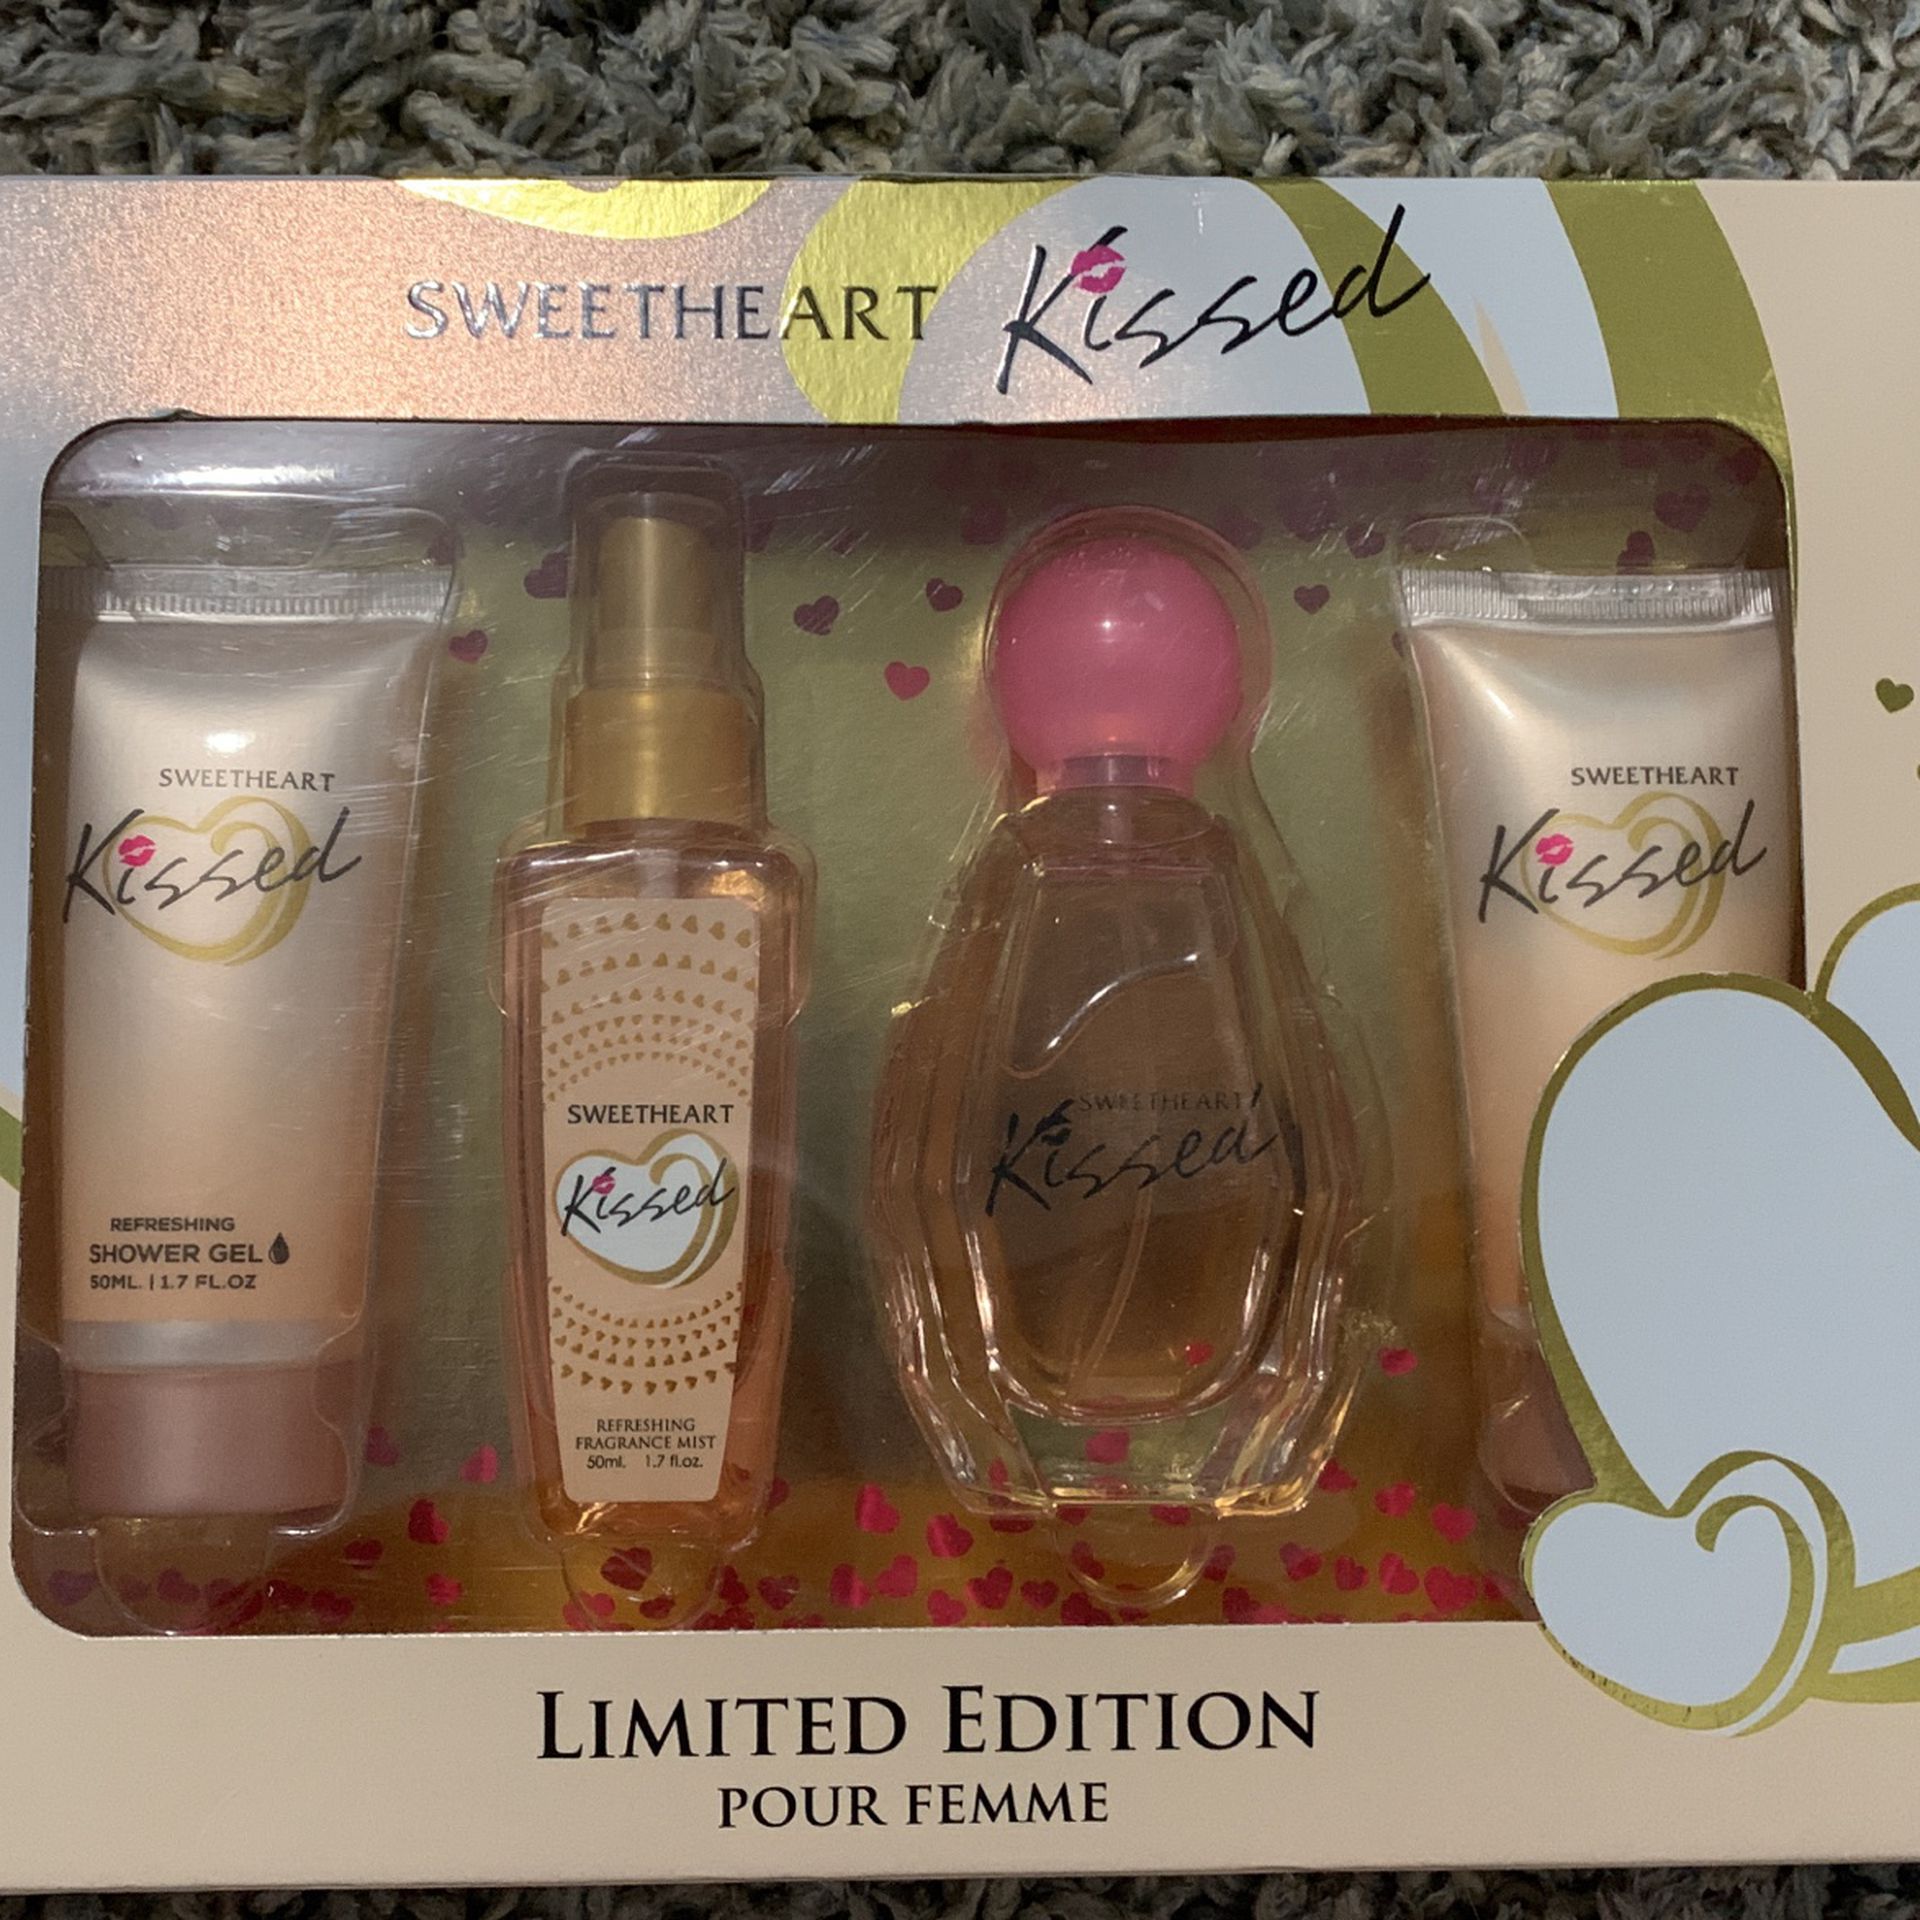 New” Sweetheart Kissed Gift set for Sale in Ashland, VA - OfferUp